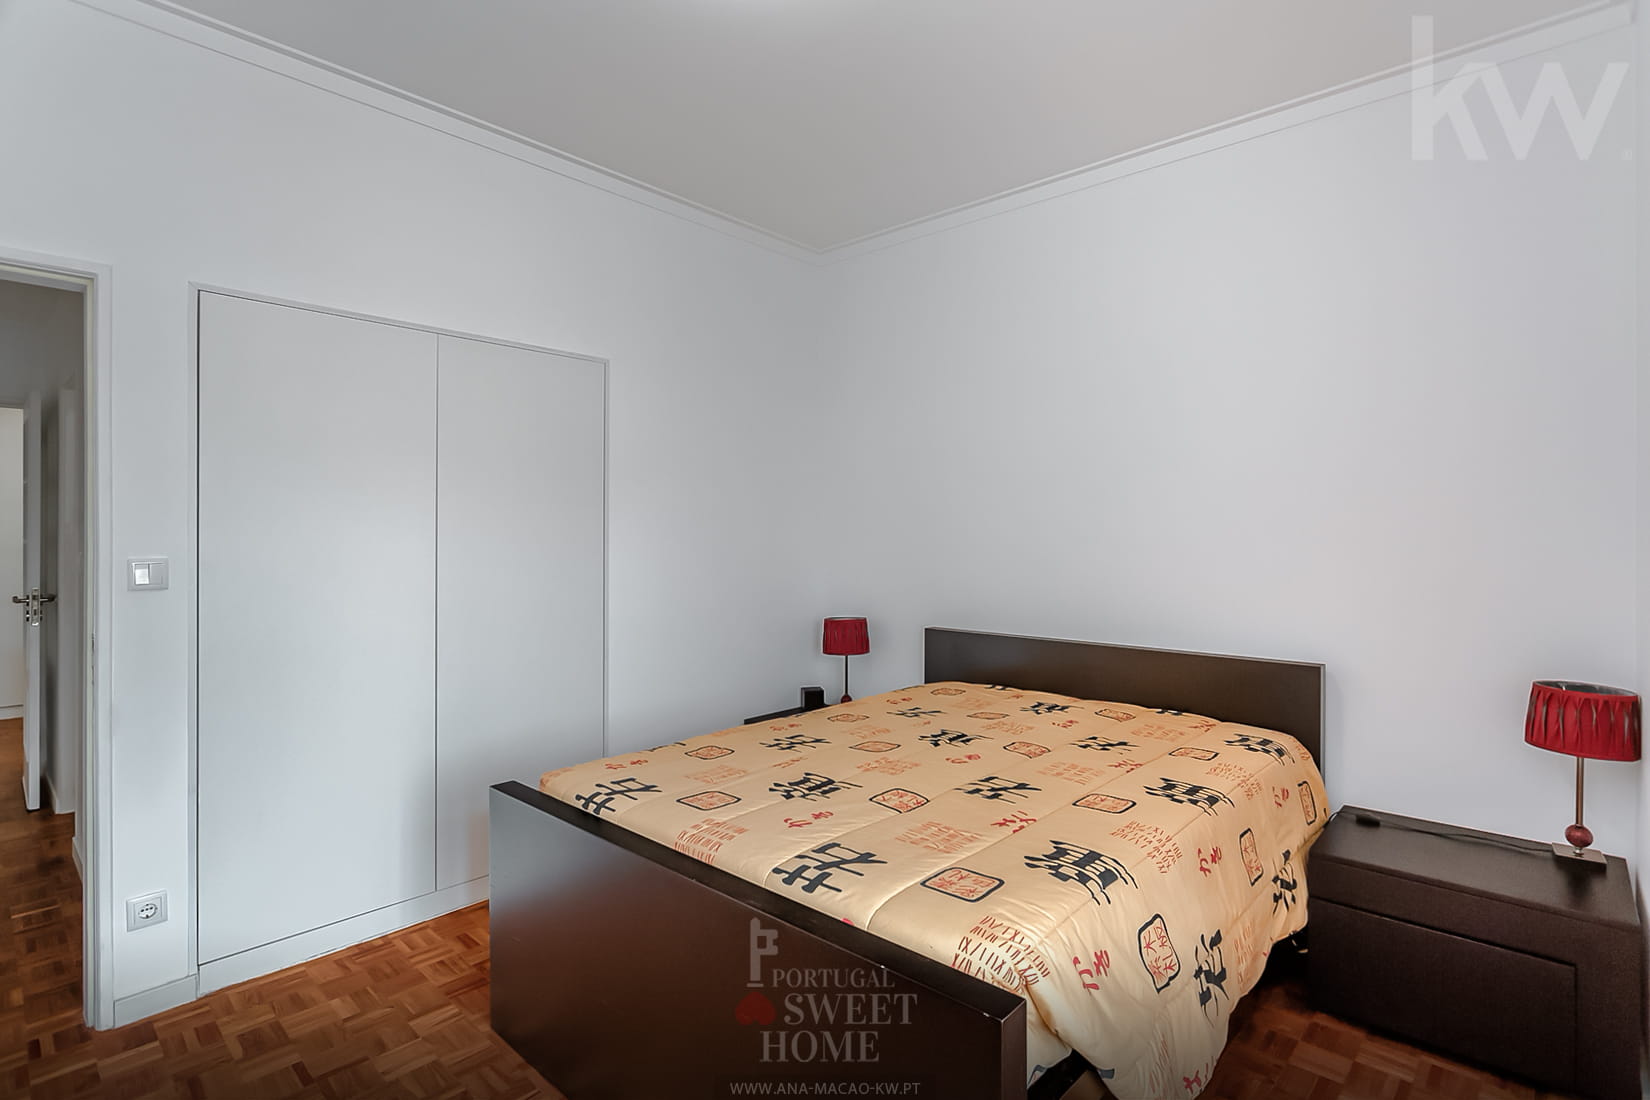 Master bedroom (14.44 m²) with built-in wardrobe